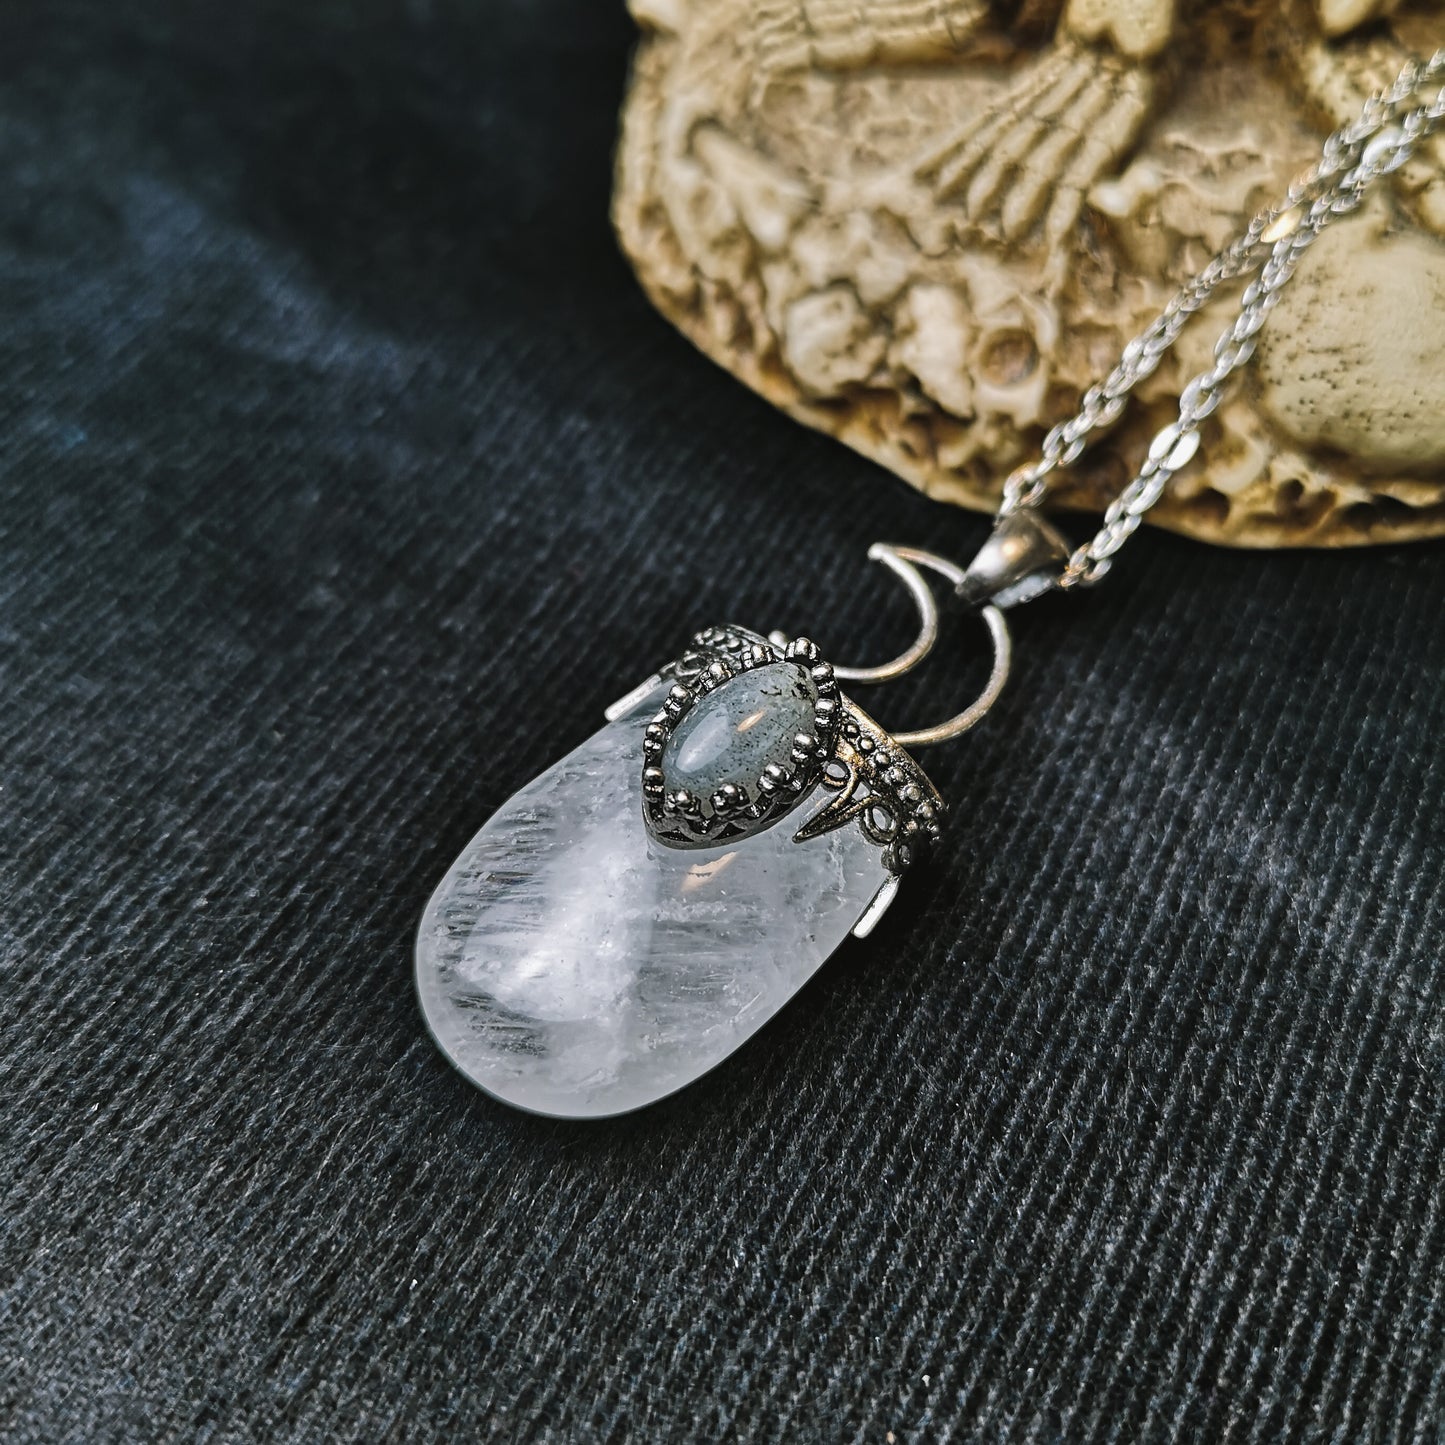 Crescent moon quartz and labradorite witchy necklace - The French Witch shop